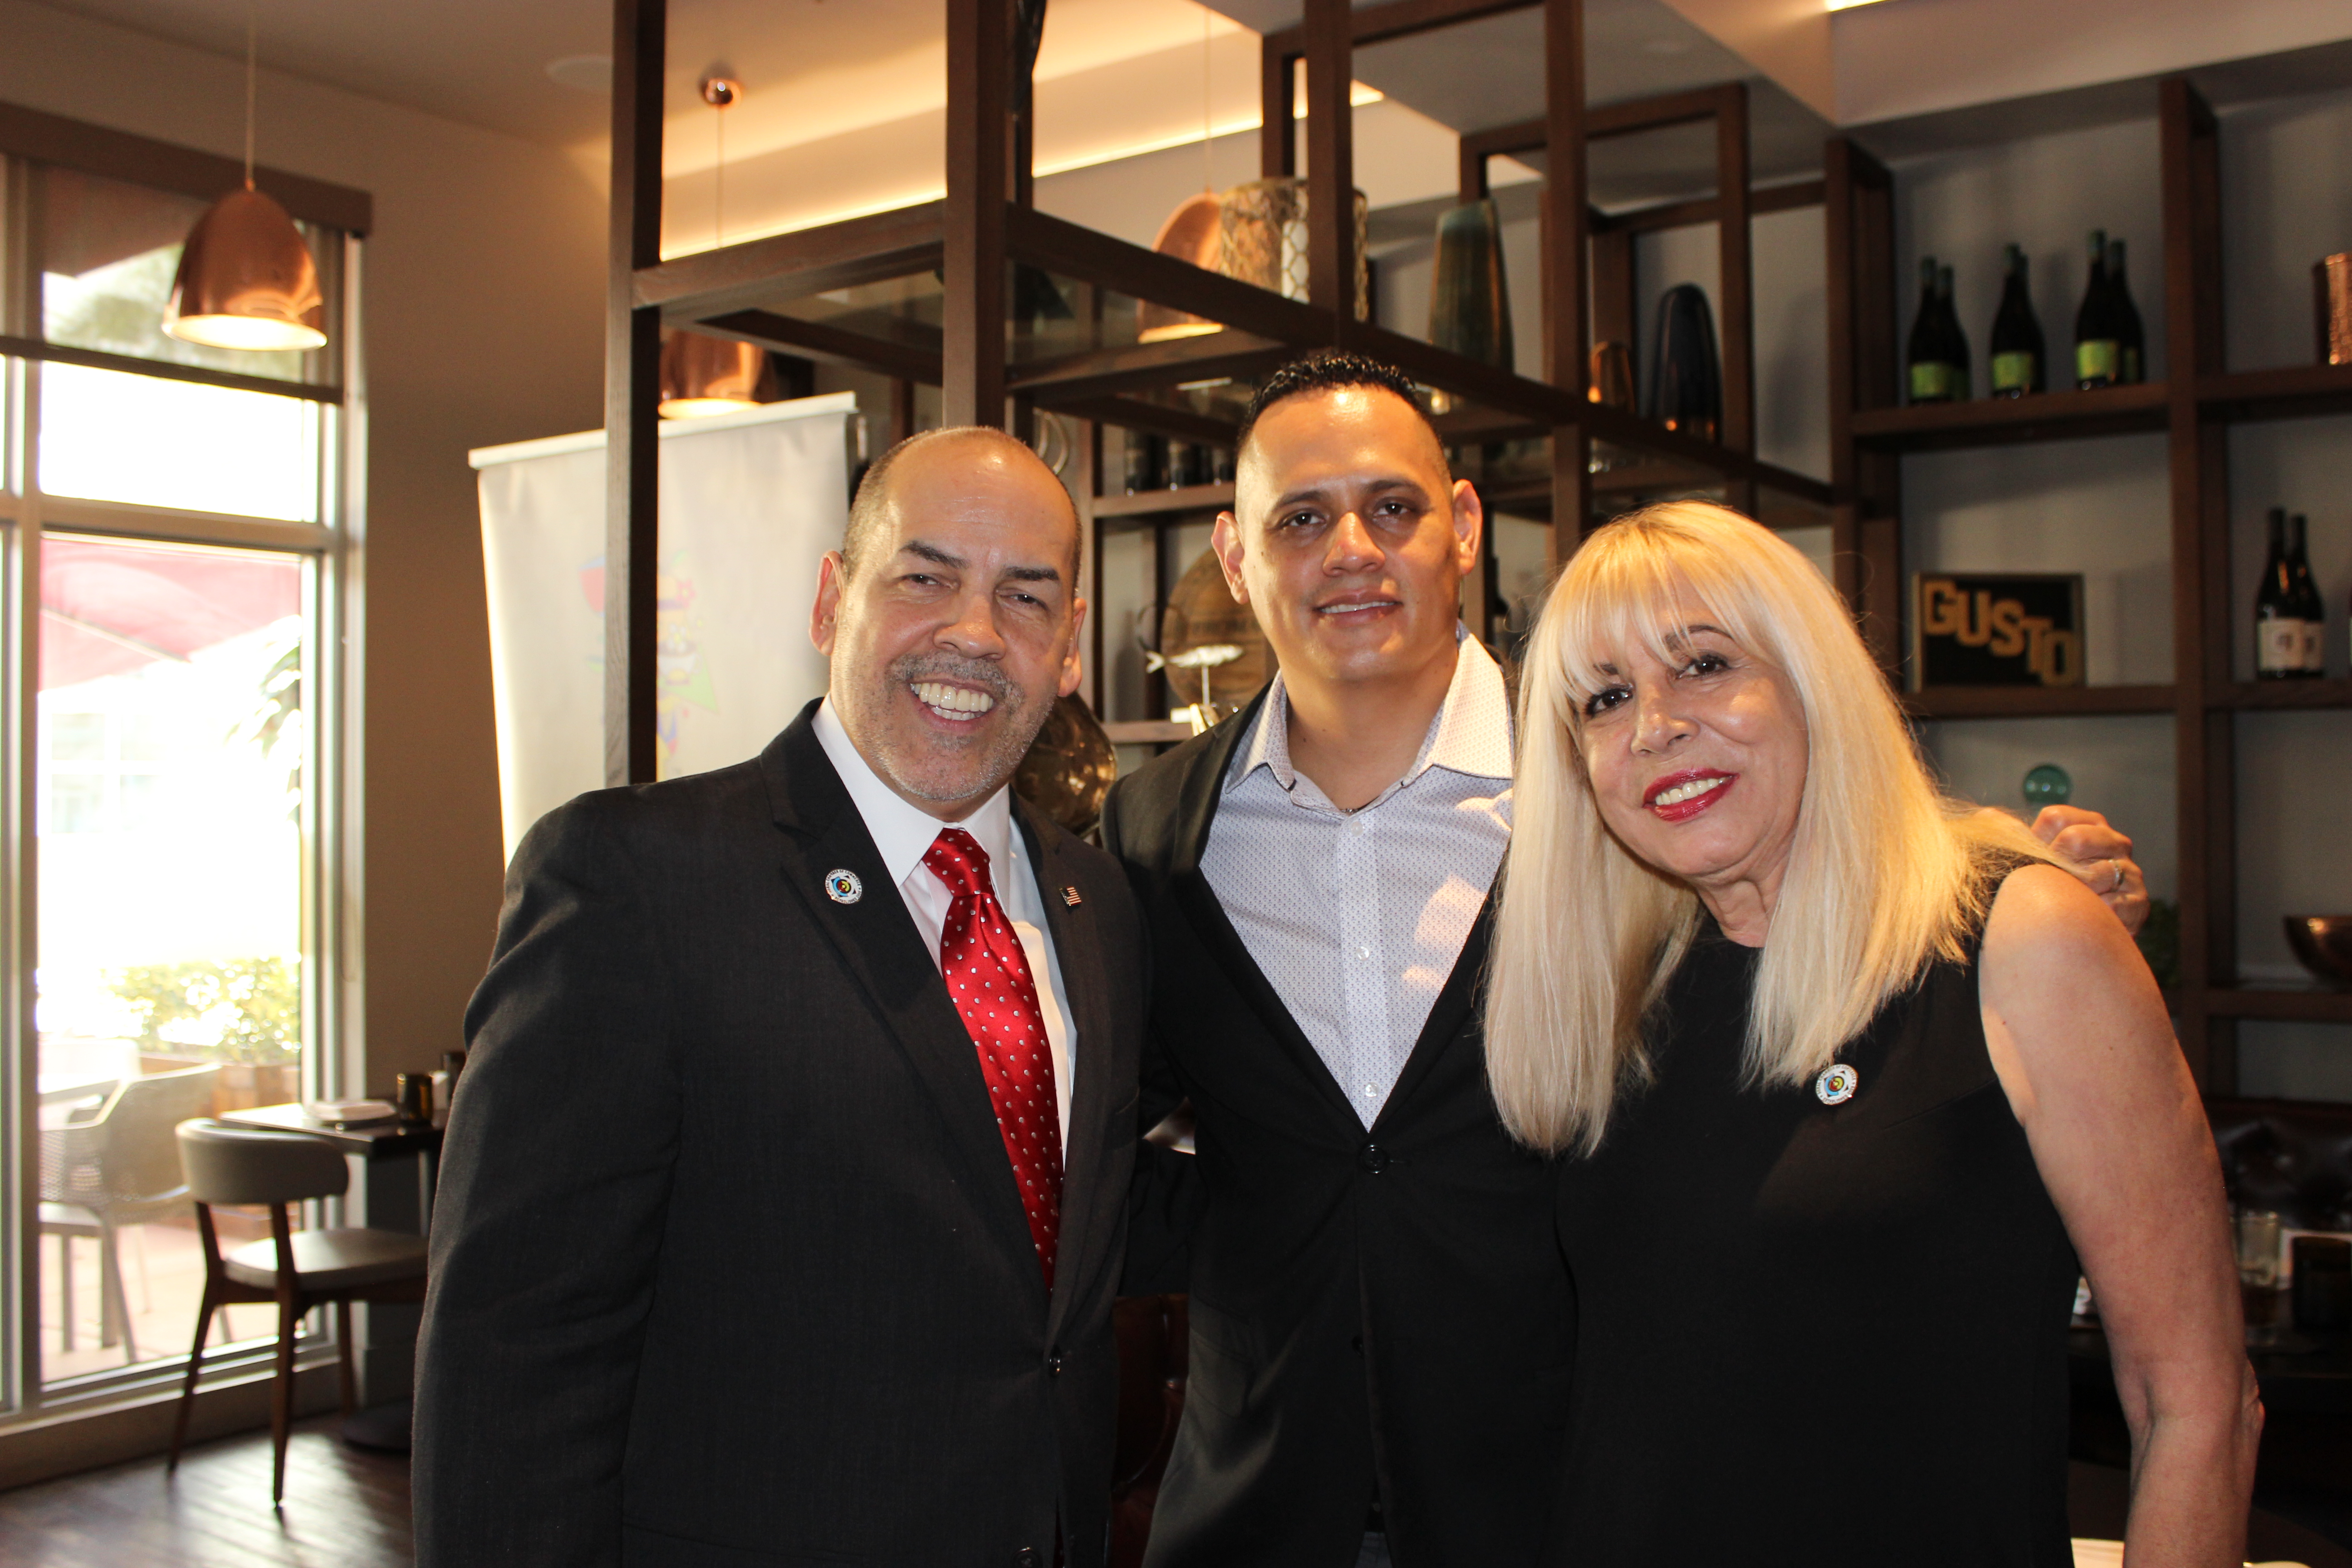 Manny Sarmiento, Carmen Lopez, and Bayardo Aleman in Gusto Ristobar Luncheon hosted by Doral Chamber of Commerce.